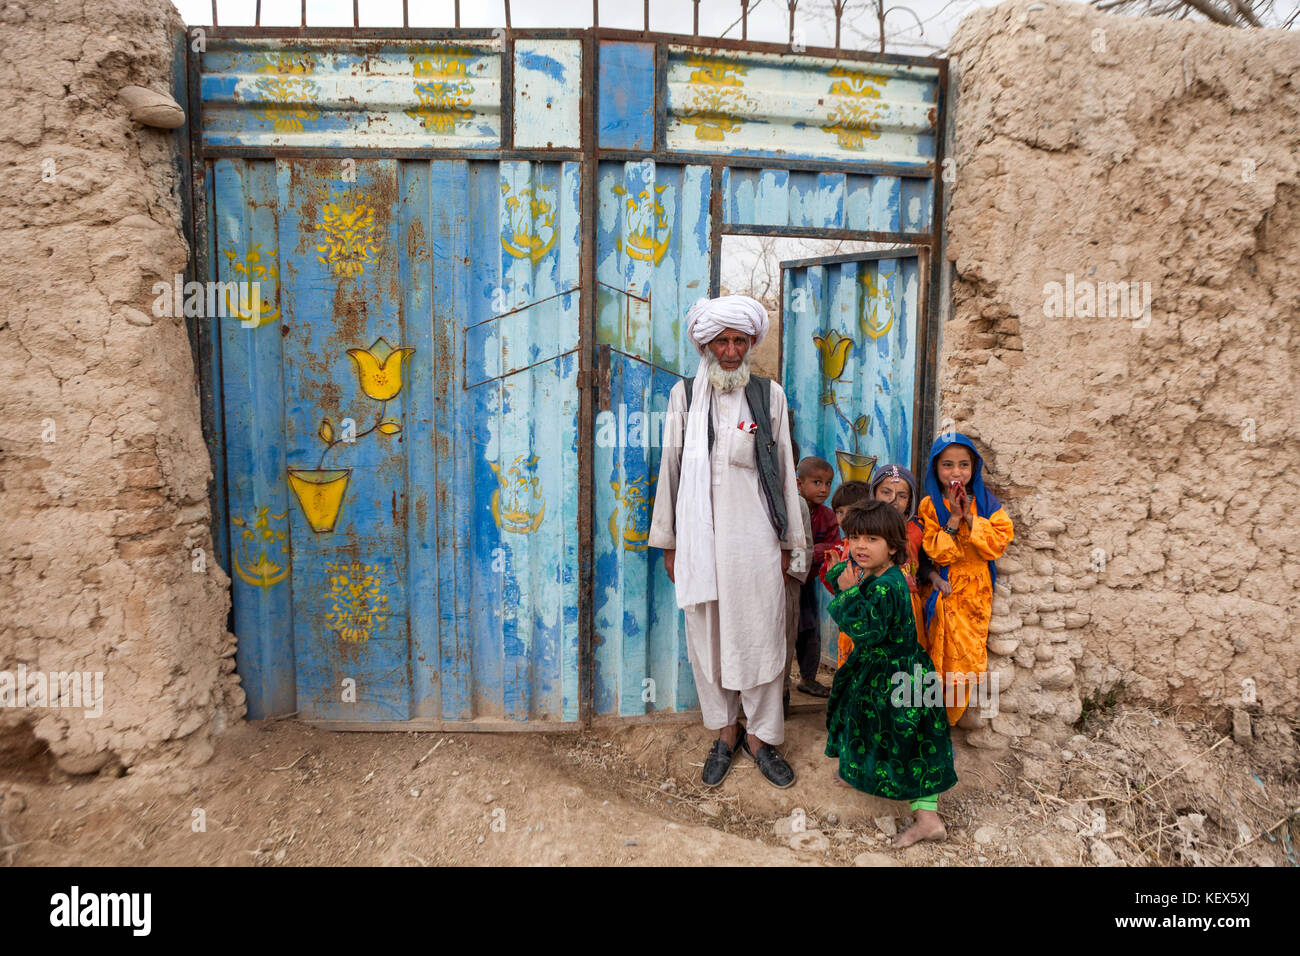 An Afghan man stands outside the gate to his compound with young ...